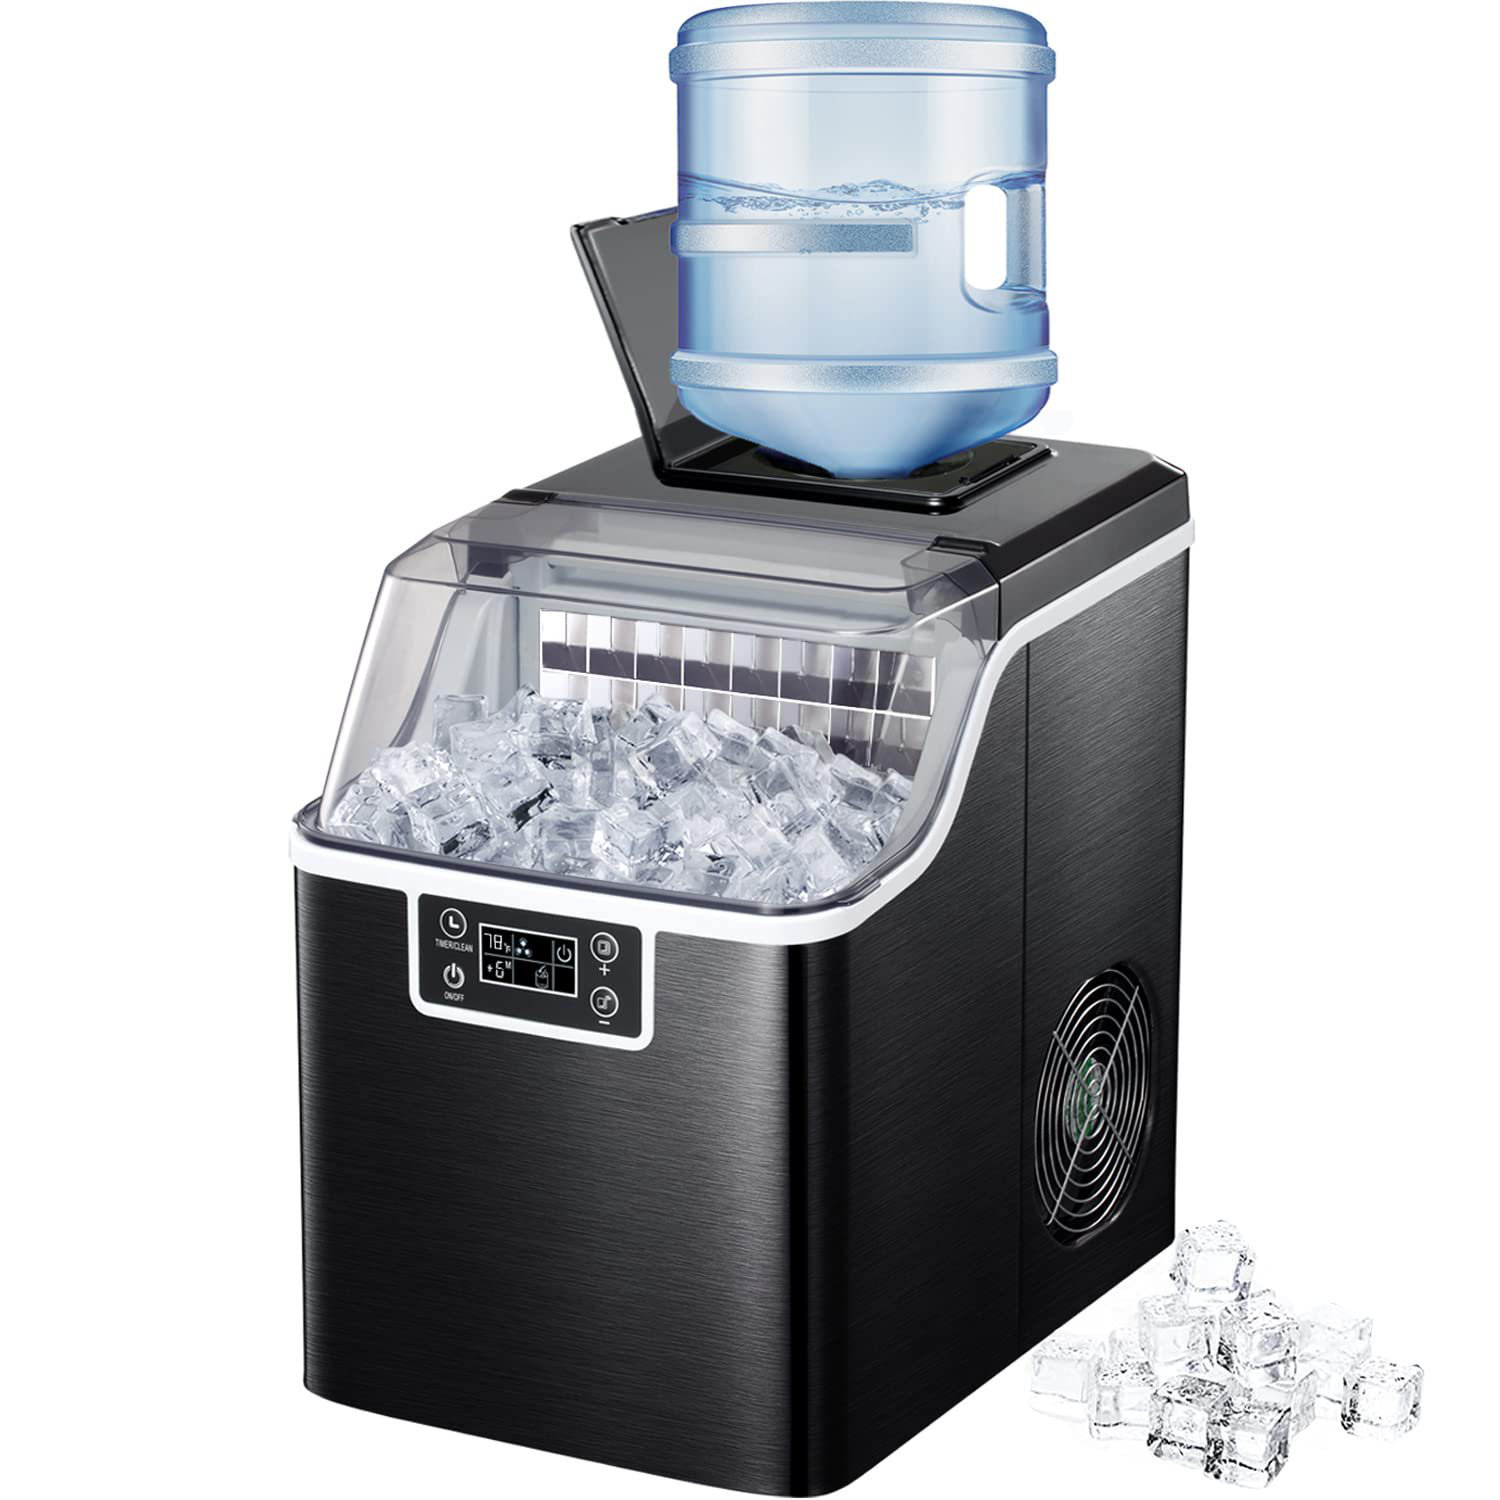 COWSAR 44 lb. lb. Daily Production Clear Ice Portable Ice Maker Finish: Black ZCO5820AF-BLACK